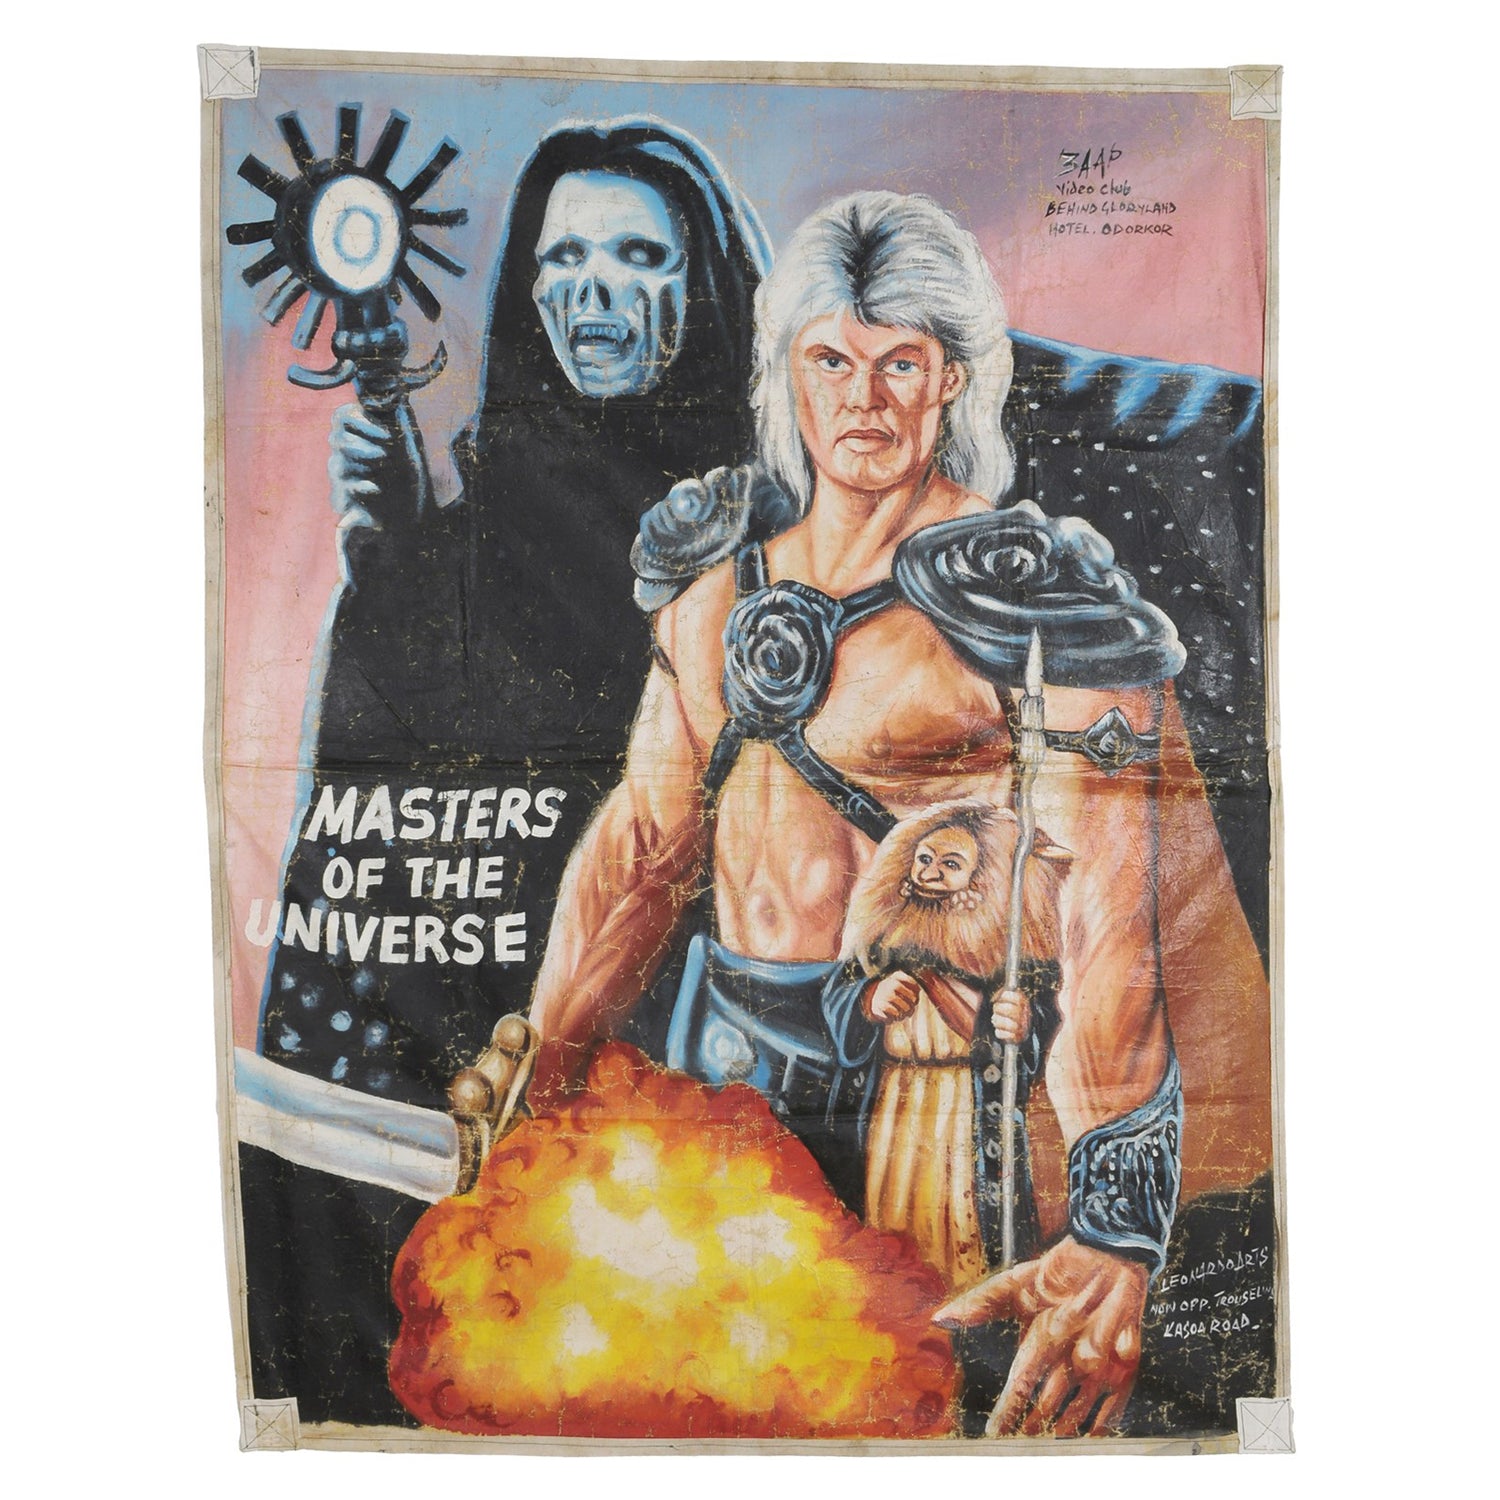 MASTERS OF THE UNIVERSE MOVIE POSTER HAND PAINTING GHANAIAN CINEMA ART